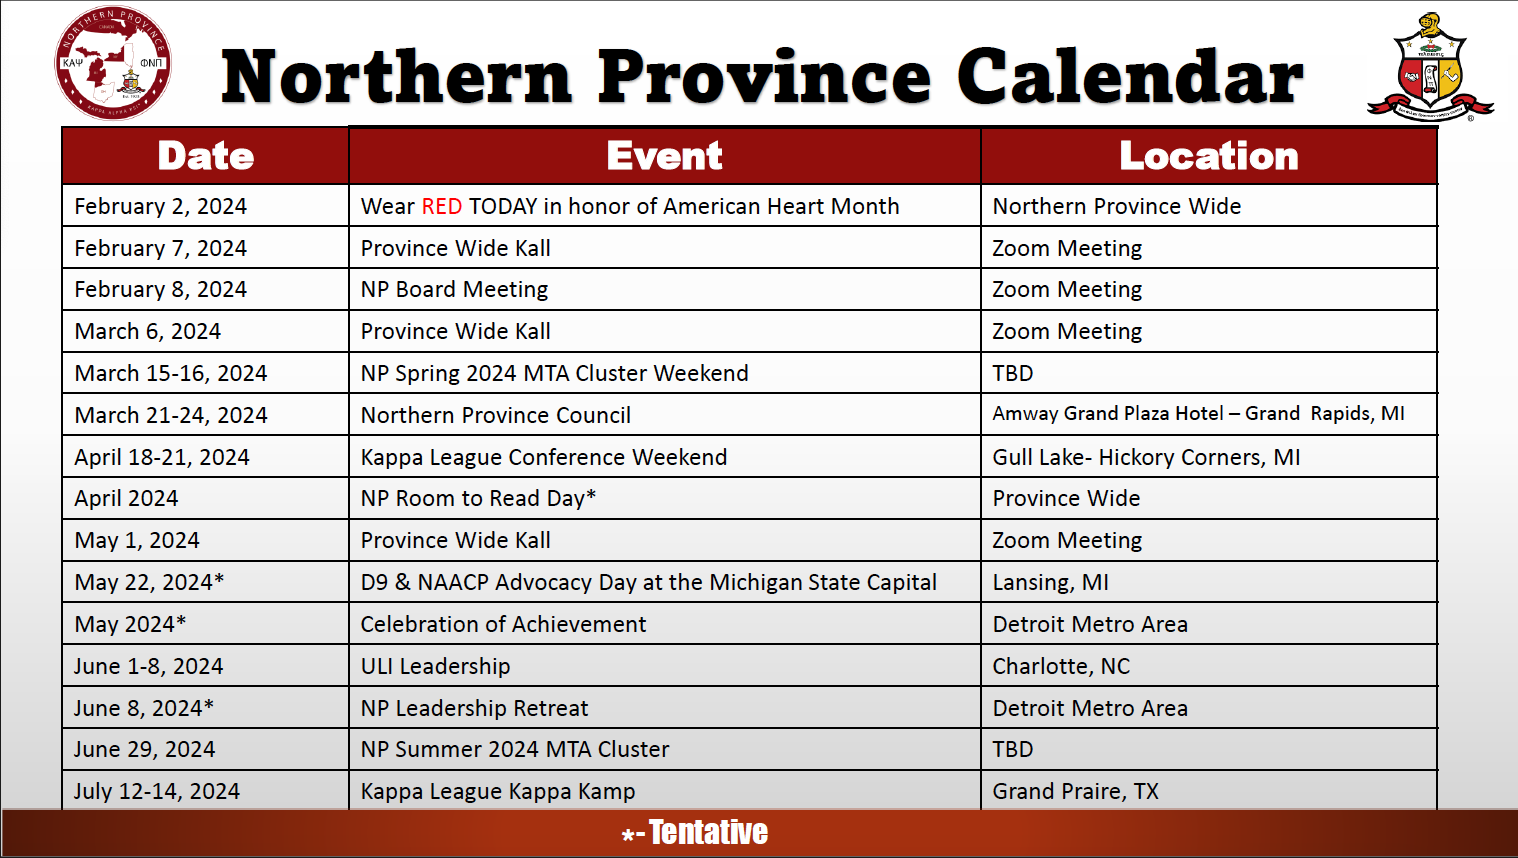 Image of calendar with date, event, and location information